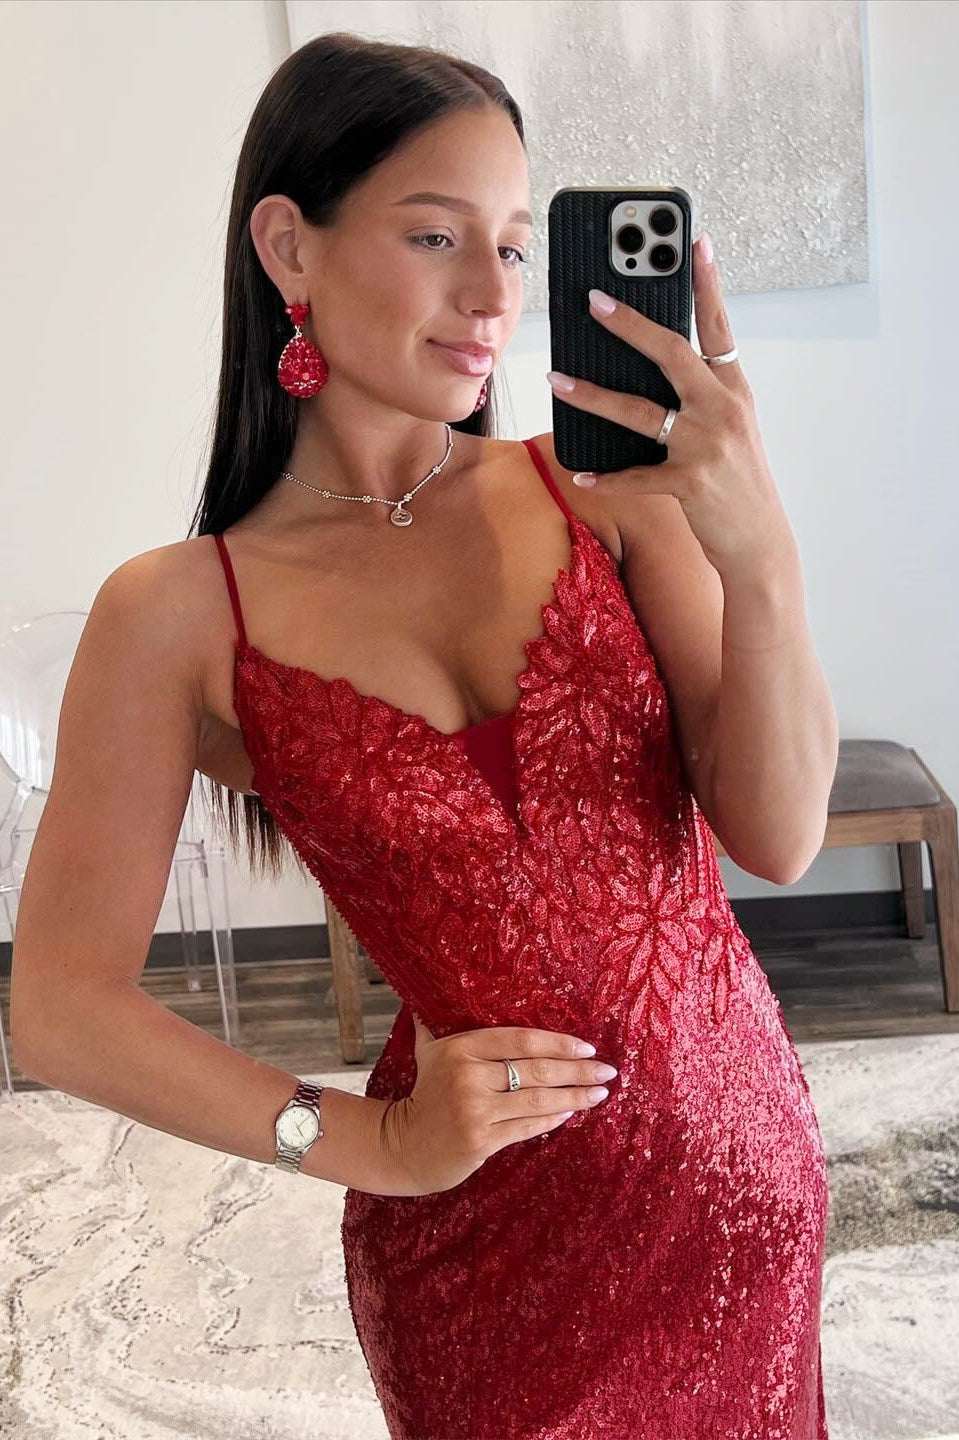 Red Sequin Plunge V Backless Mermaid Maxi Dress with Slit